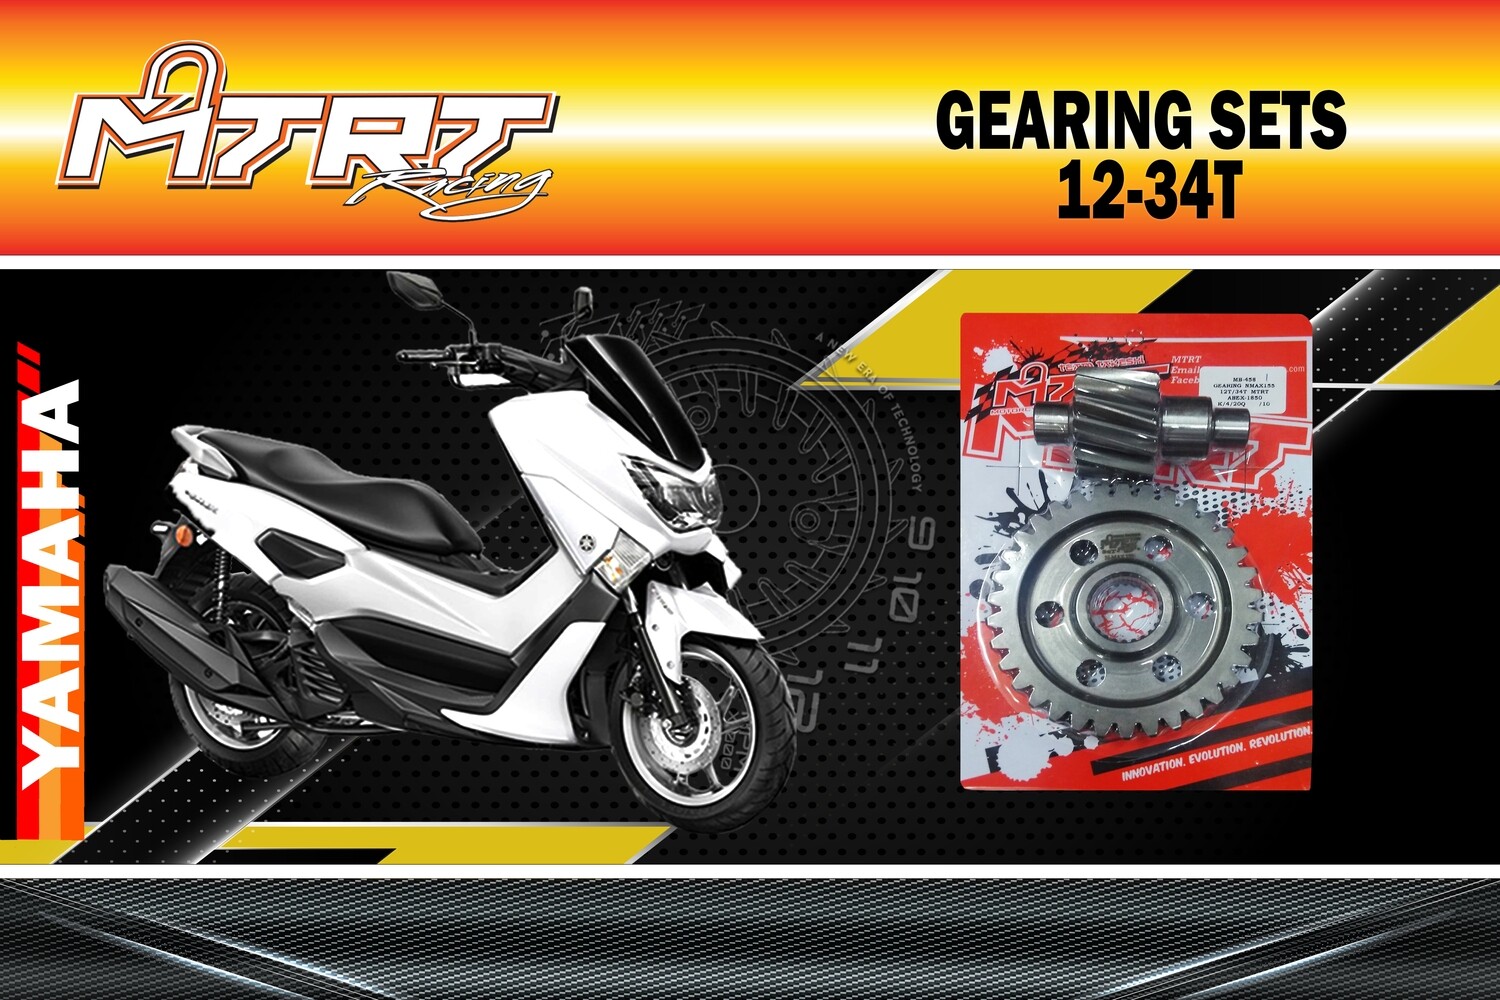 GEARING SETS 12-34T NMAX MTRT